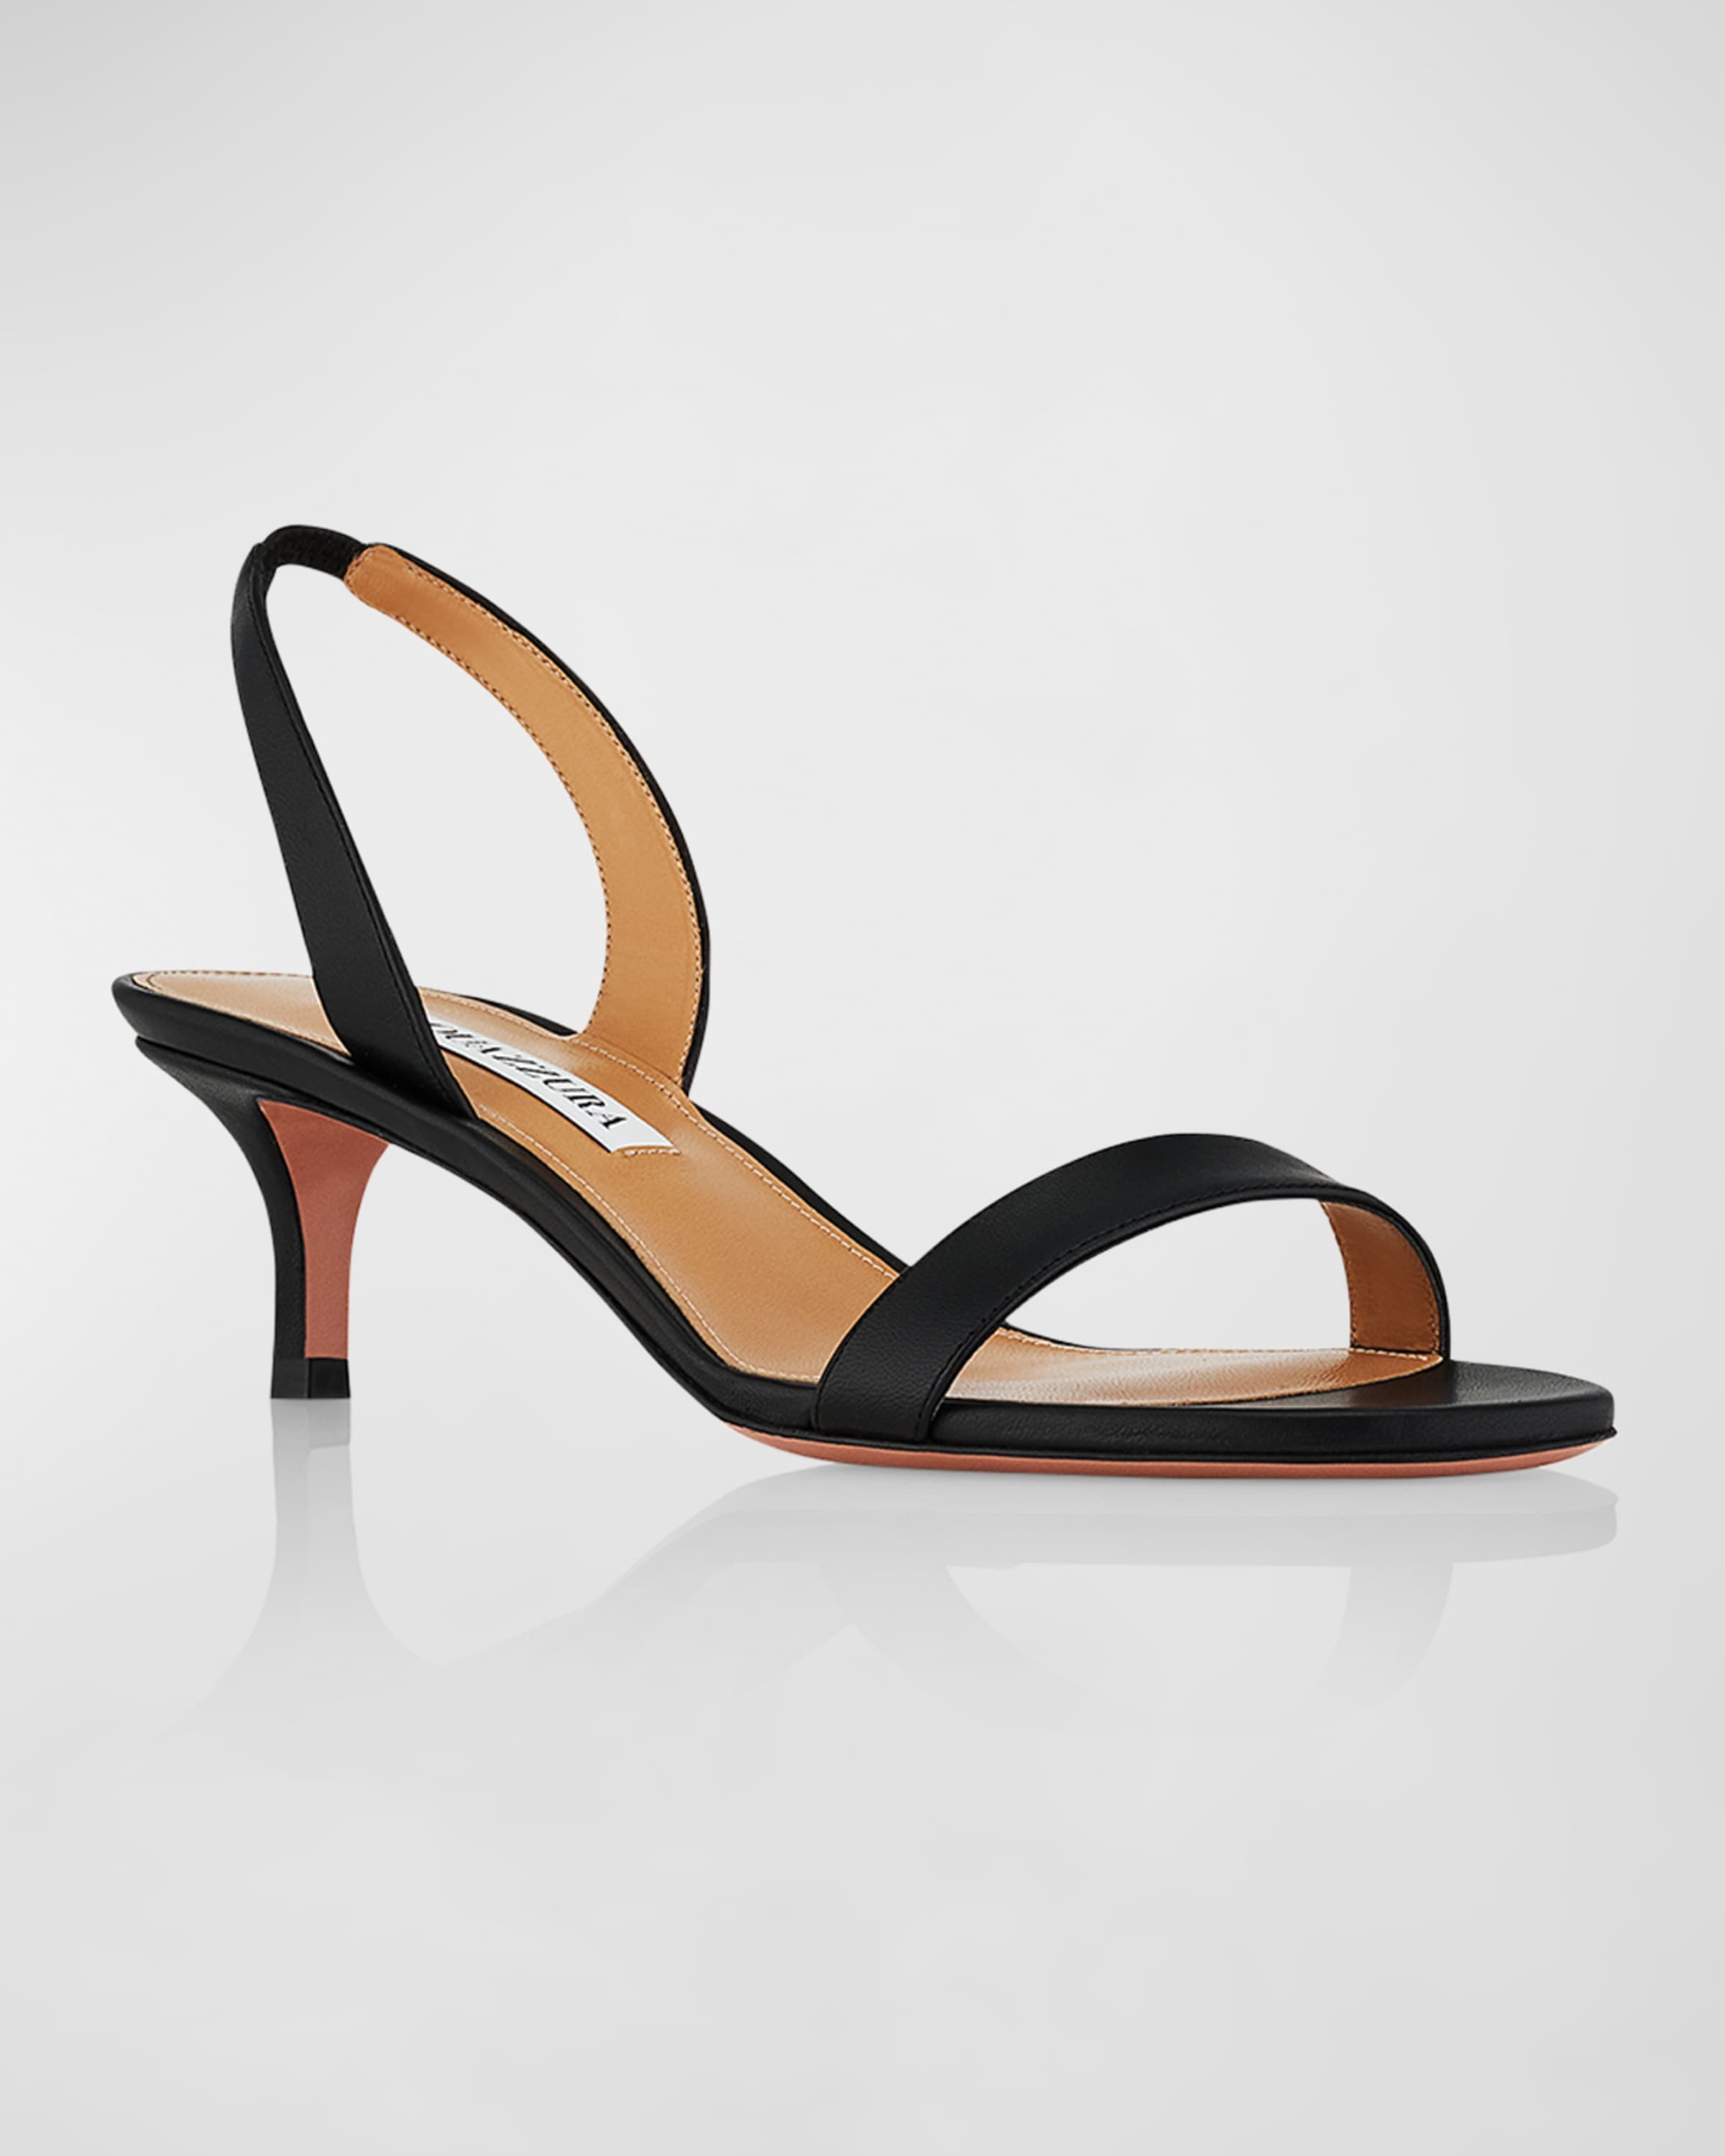 So Nude Leather Halter Sandals - 5